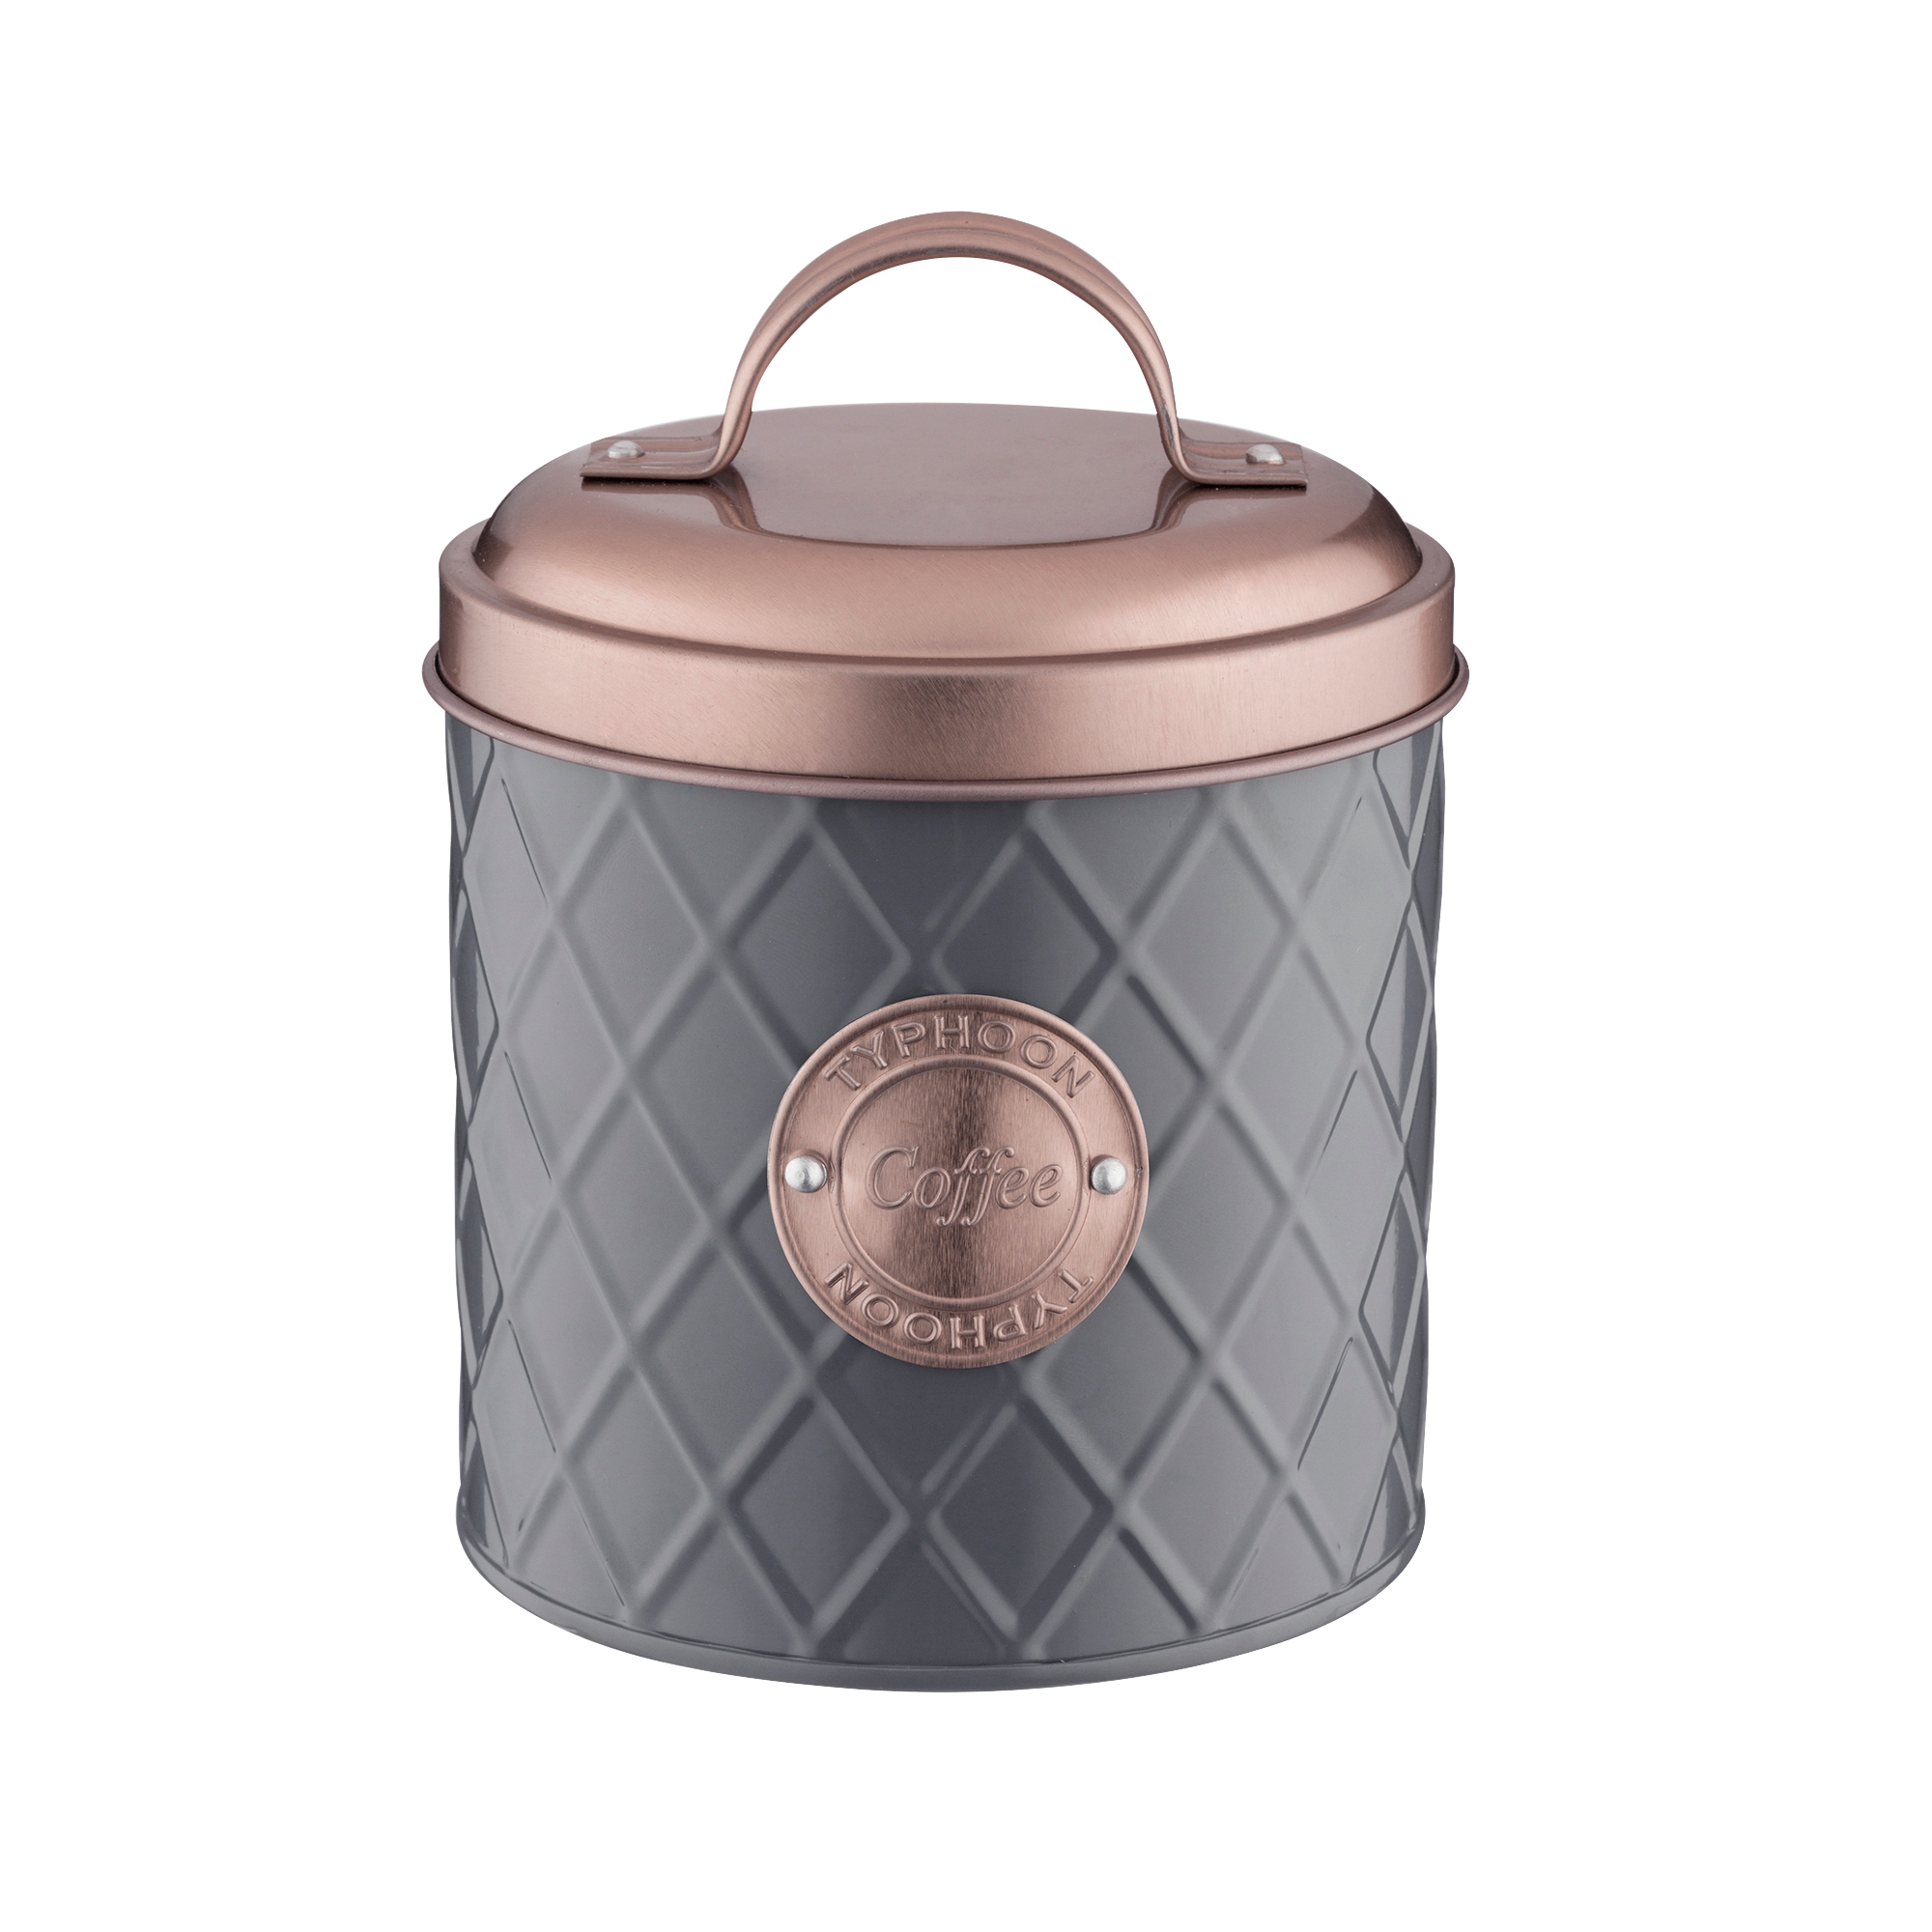 Typhoon Coffee Canister 1L Copper